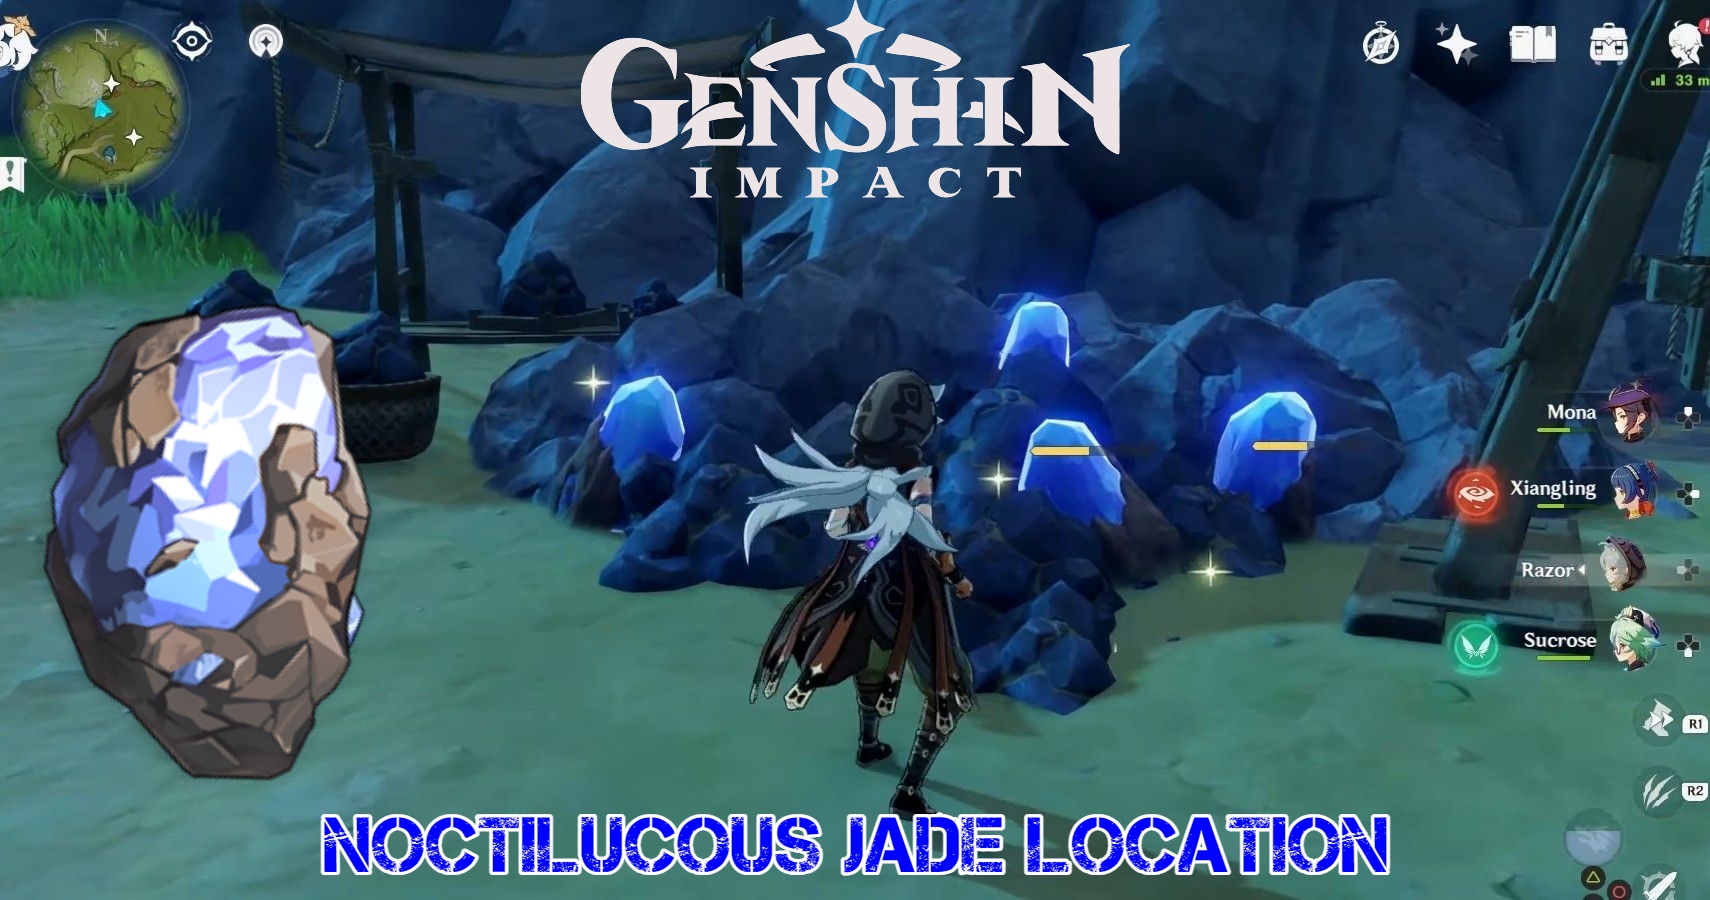 Read more about the article Genshin impact noctilucous jade location